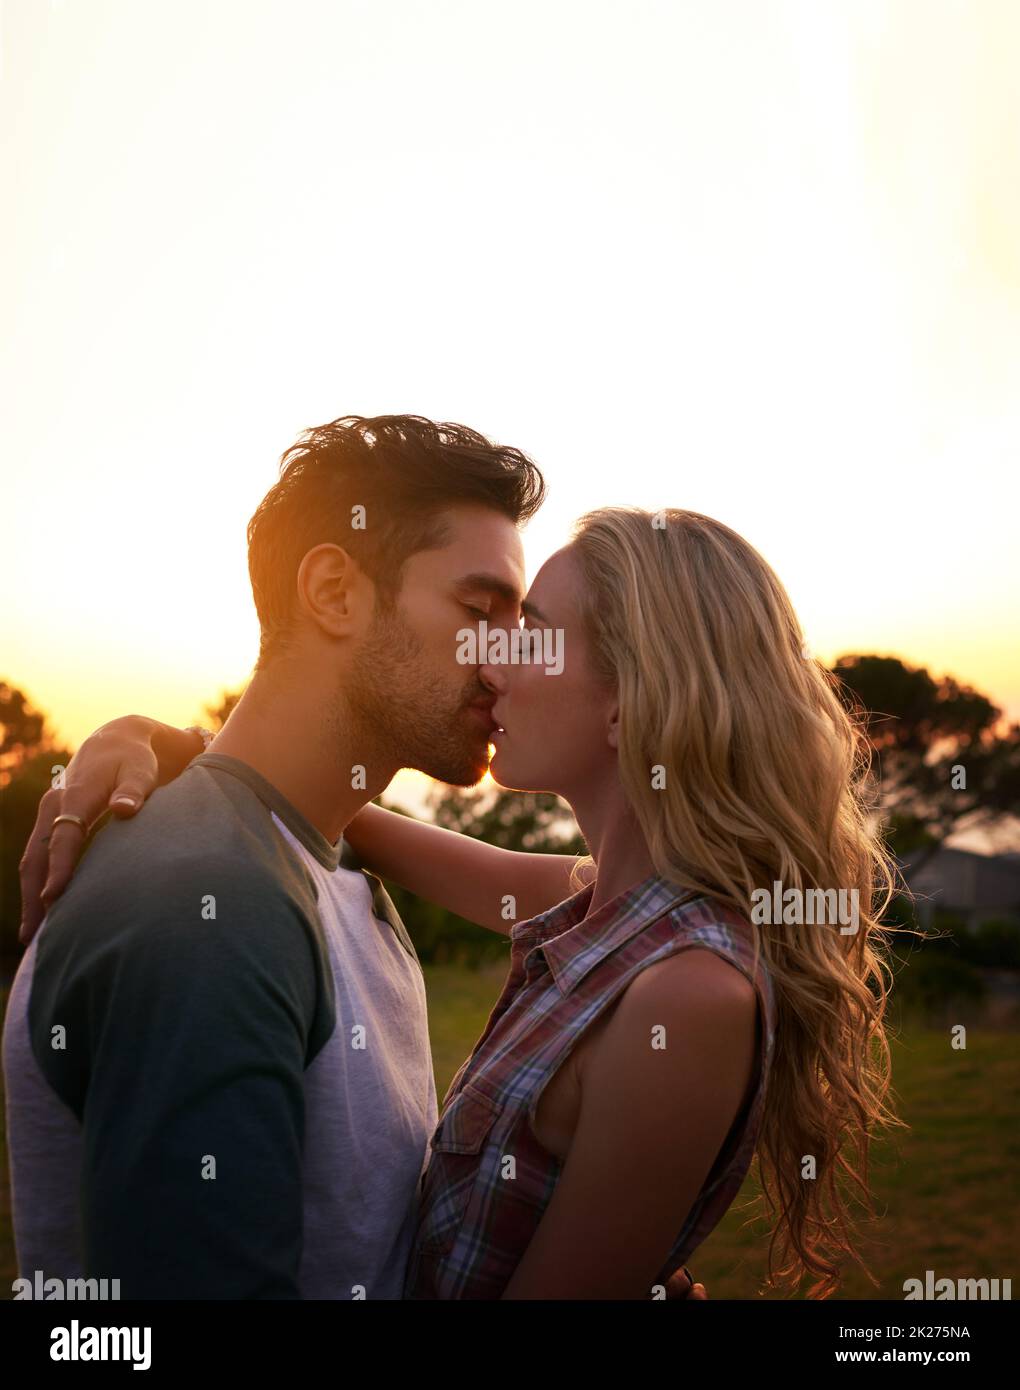 Swept up in the romance. Cropped shot of an affectionate young couple outdoors. Stock Photo